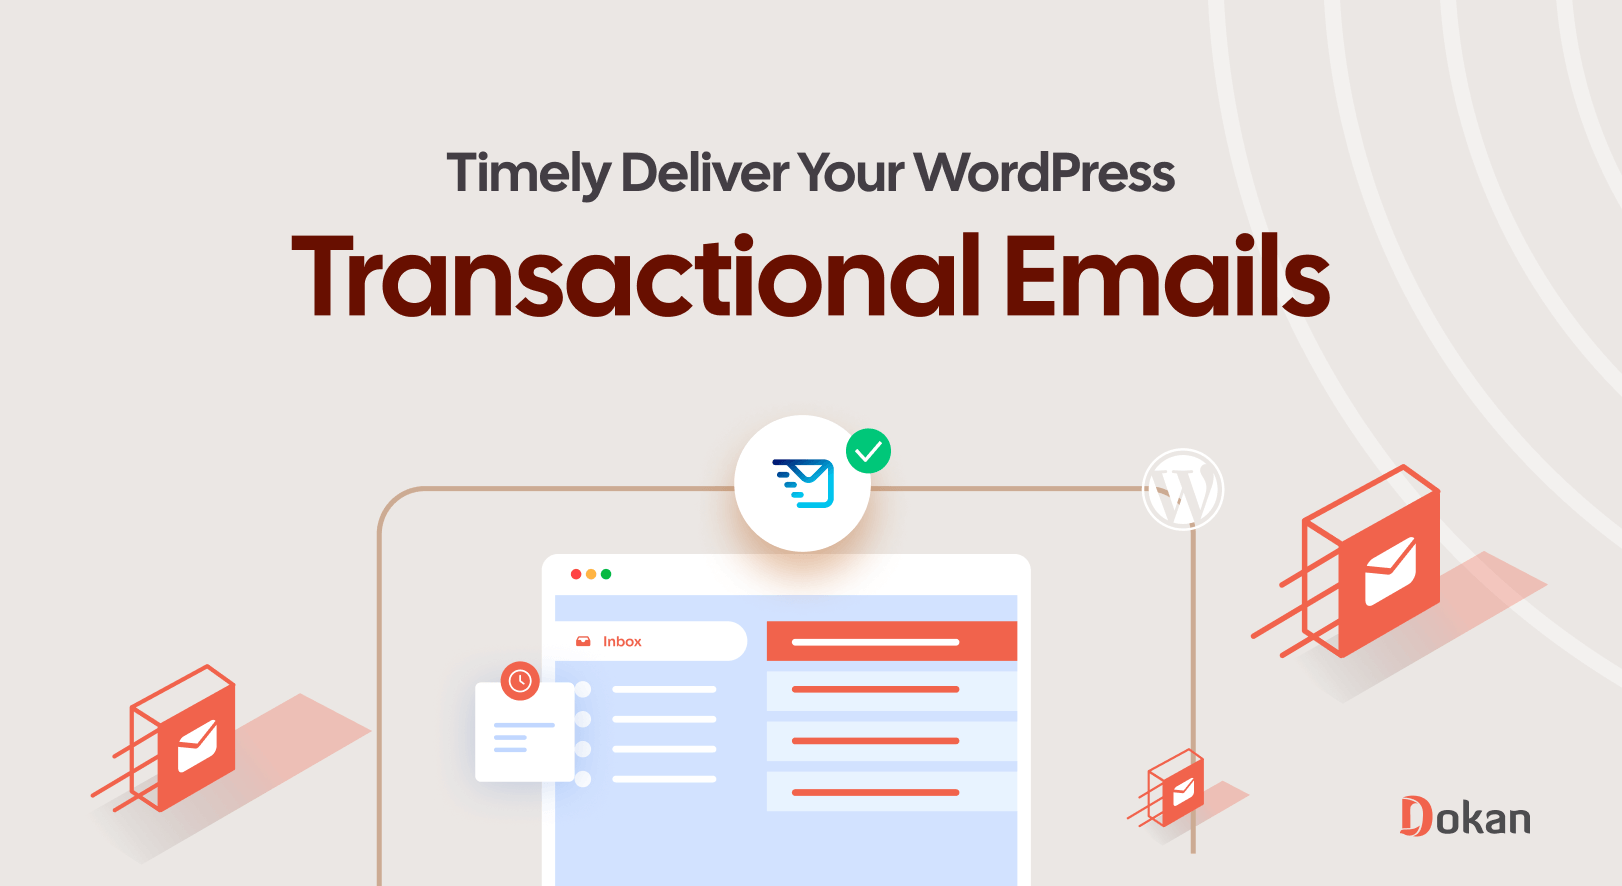 This is the feature image of the blog - WordPress Transactional Email Sender